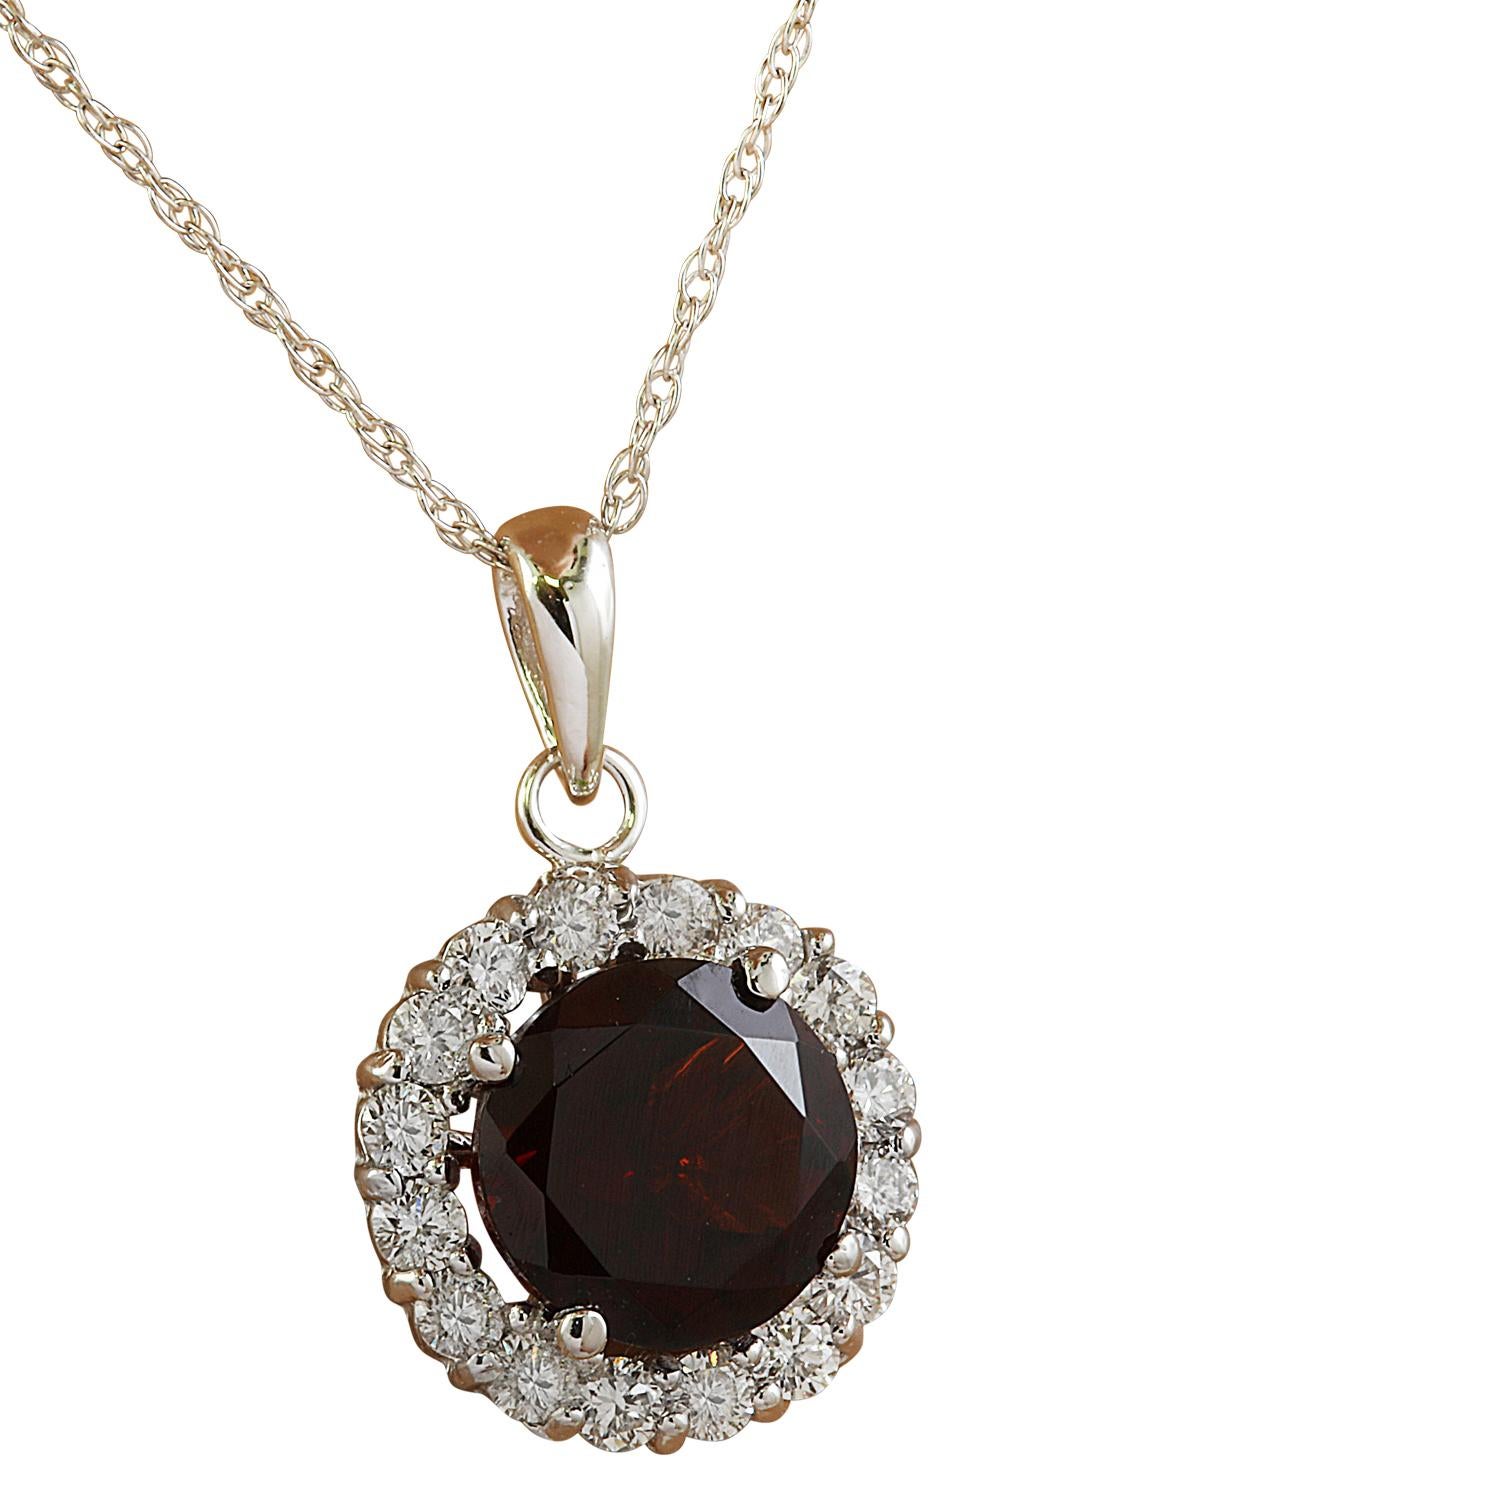 1.82 Carat Natural Garnet 14 Karat Solid White Gold Diamond Necklace
Stamped: 14K
Total Necklace Weight: 0.90 Grams
Necklace Length 16 Inches
Garnet Weight: 1.50 Carat (7.00x7.00 Millimeters)
Diamond Weight: 0.32 Carat (F-G Color, VS2-SI1 Clarity)